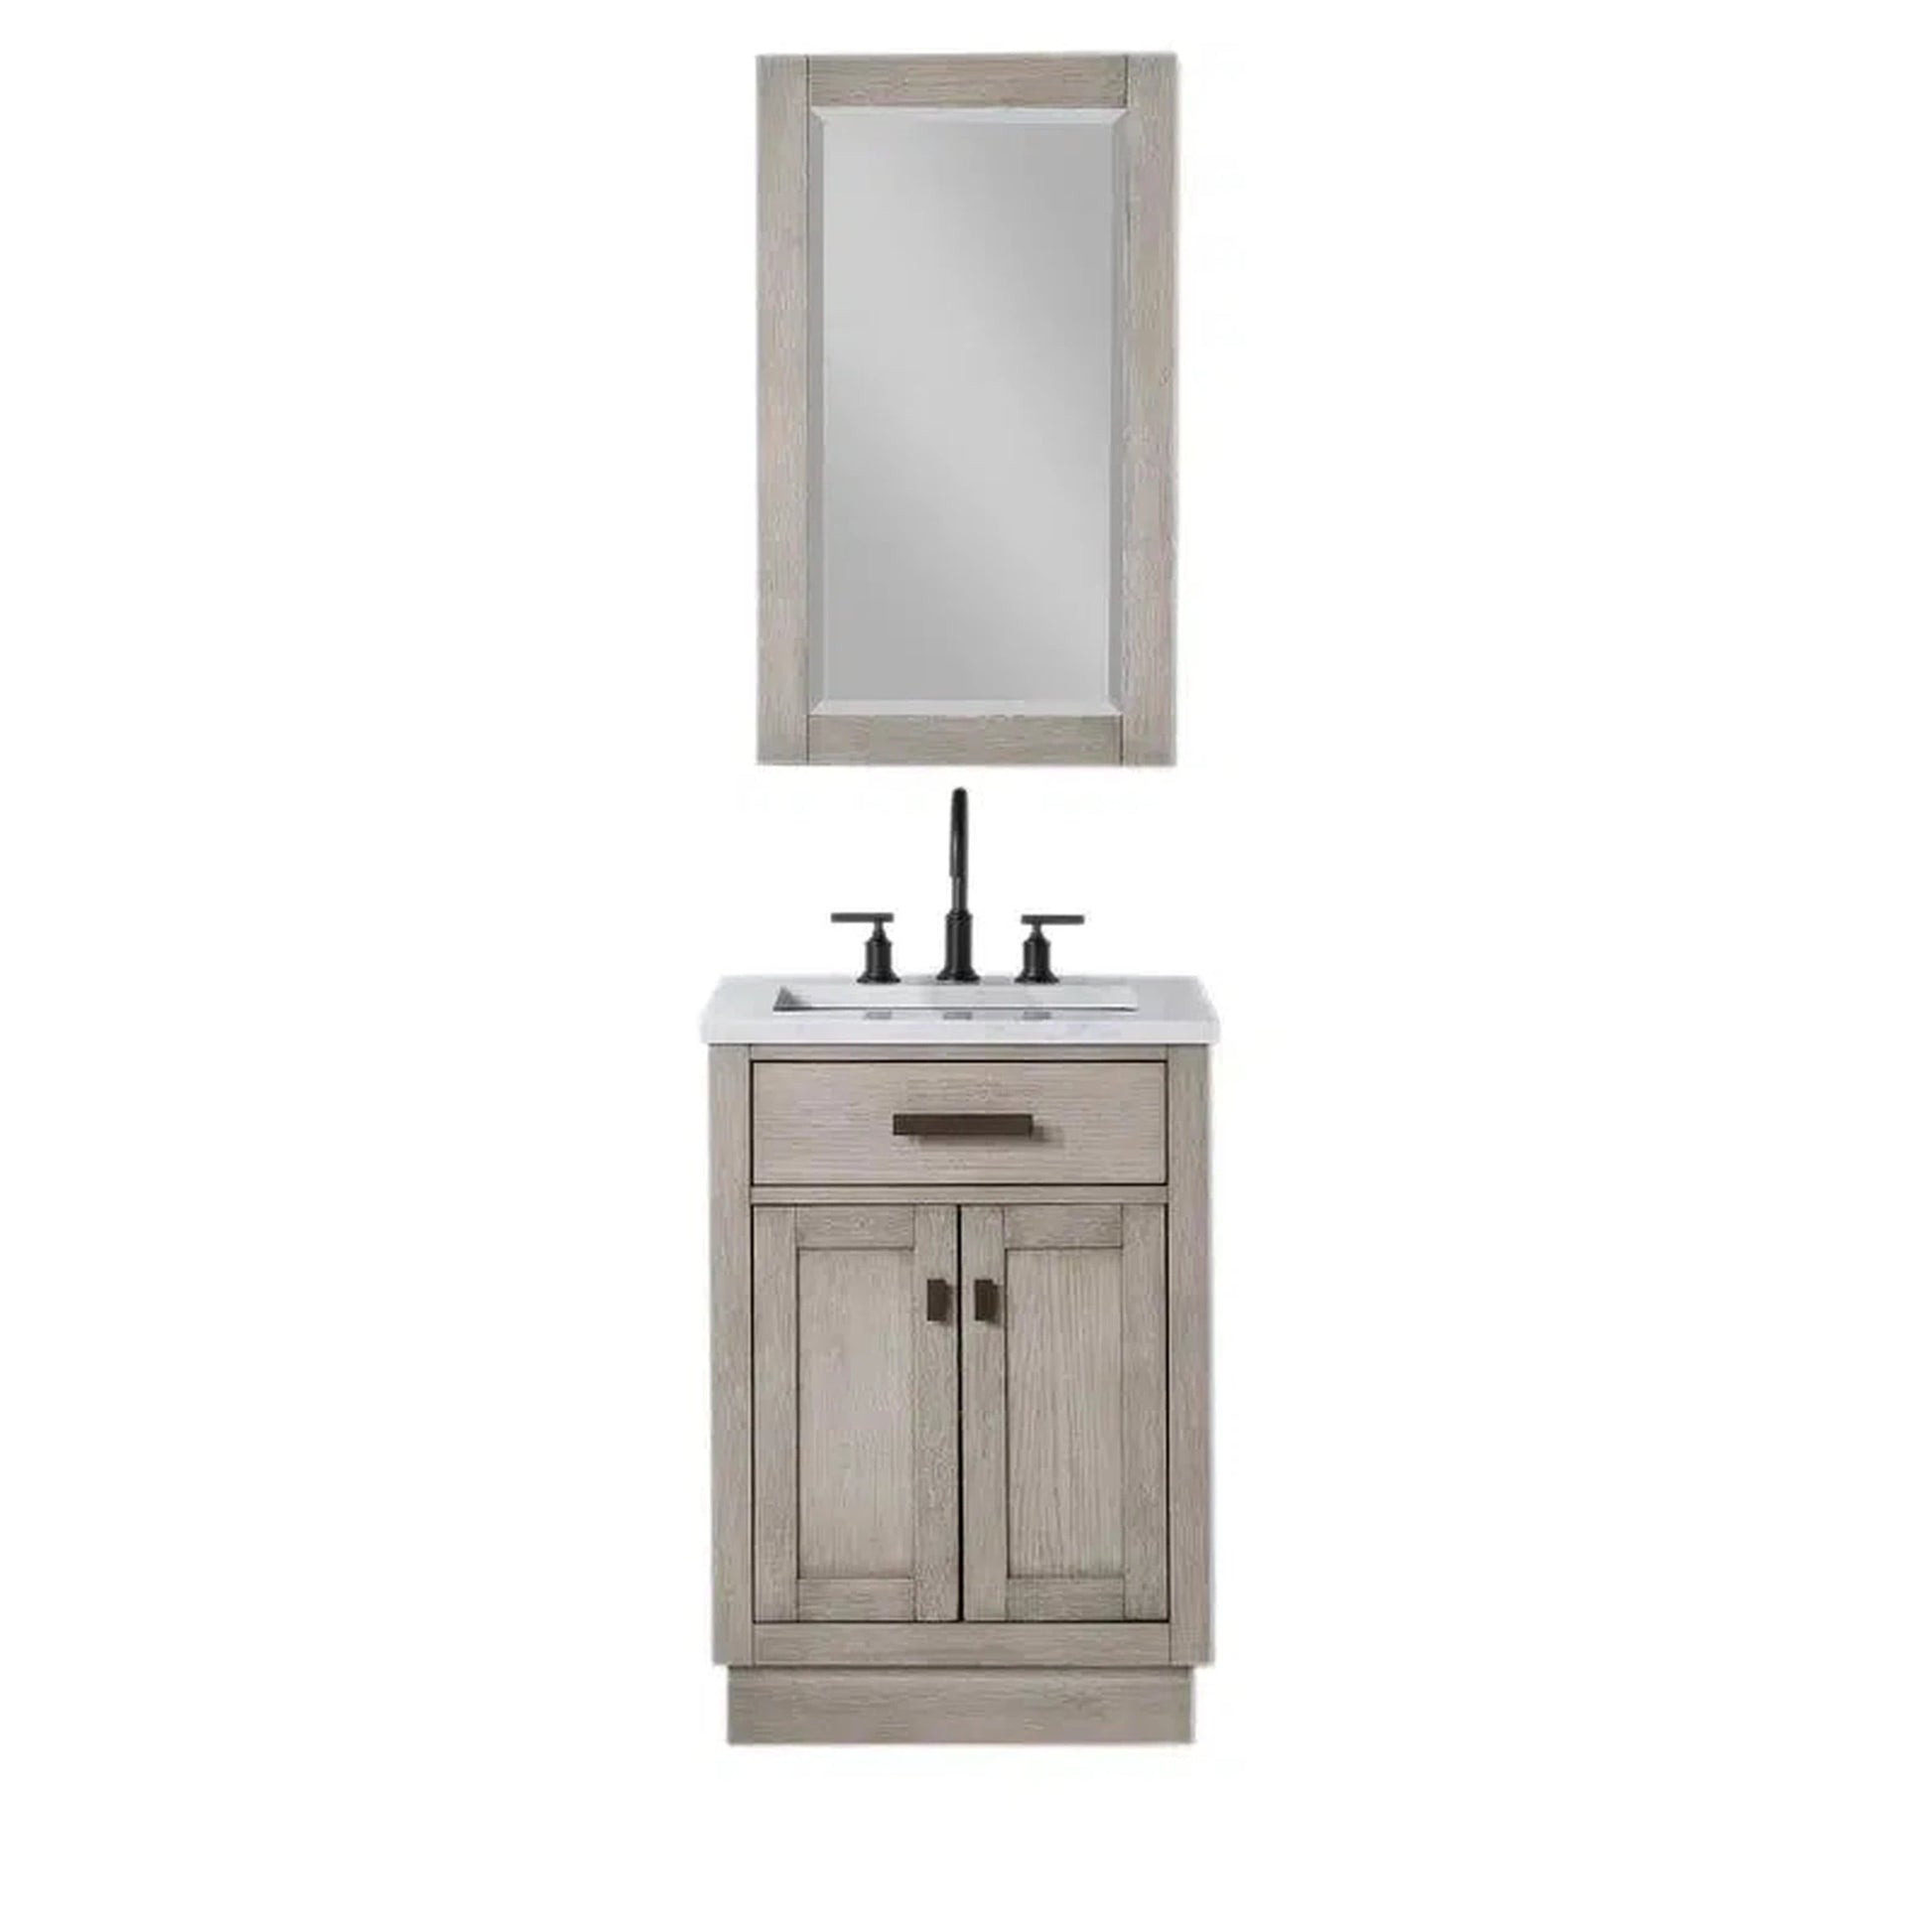 Water Creation Chestnut 24 In. Single Sink Carrara White Marble Countertop Vanity In Grey Oak with Grooseneck Faucet and Mirror